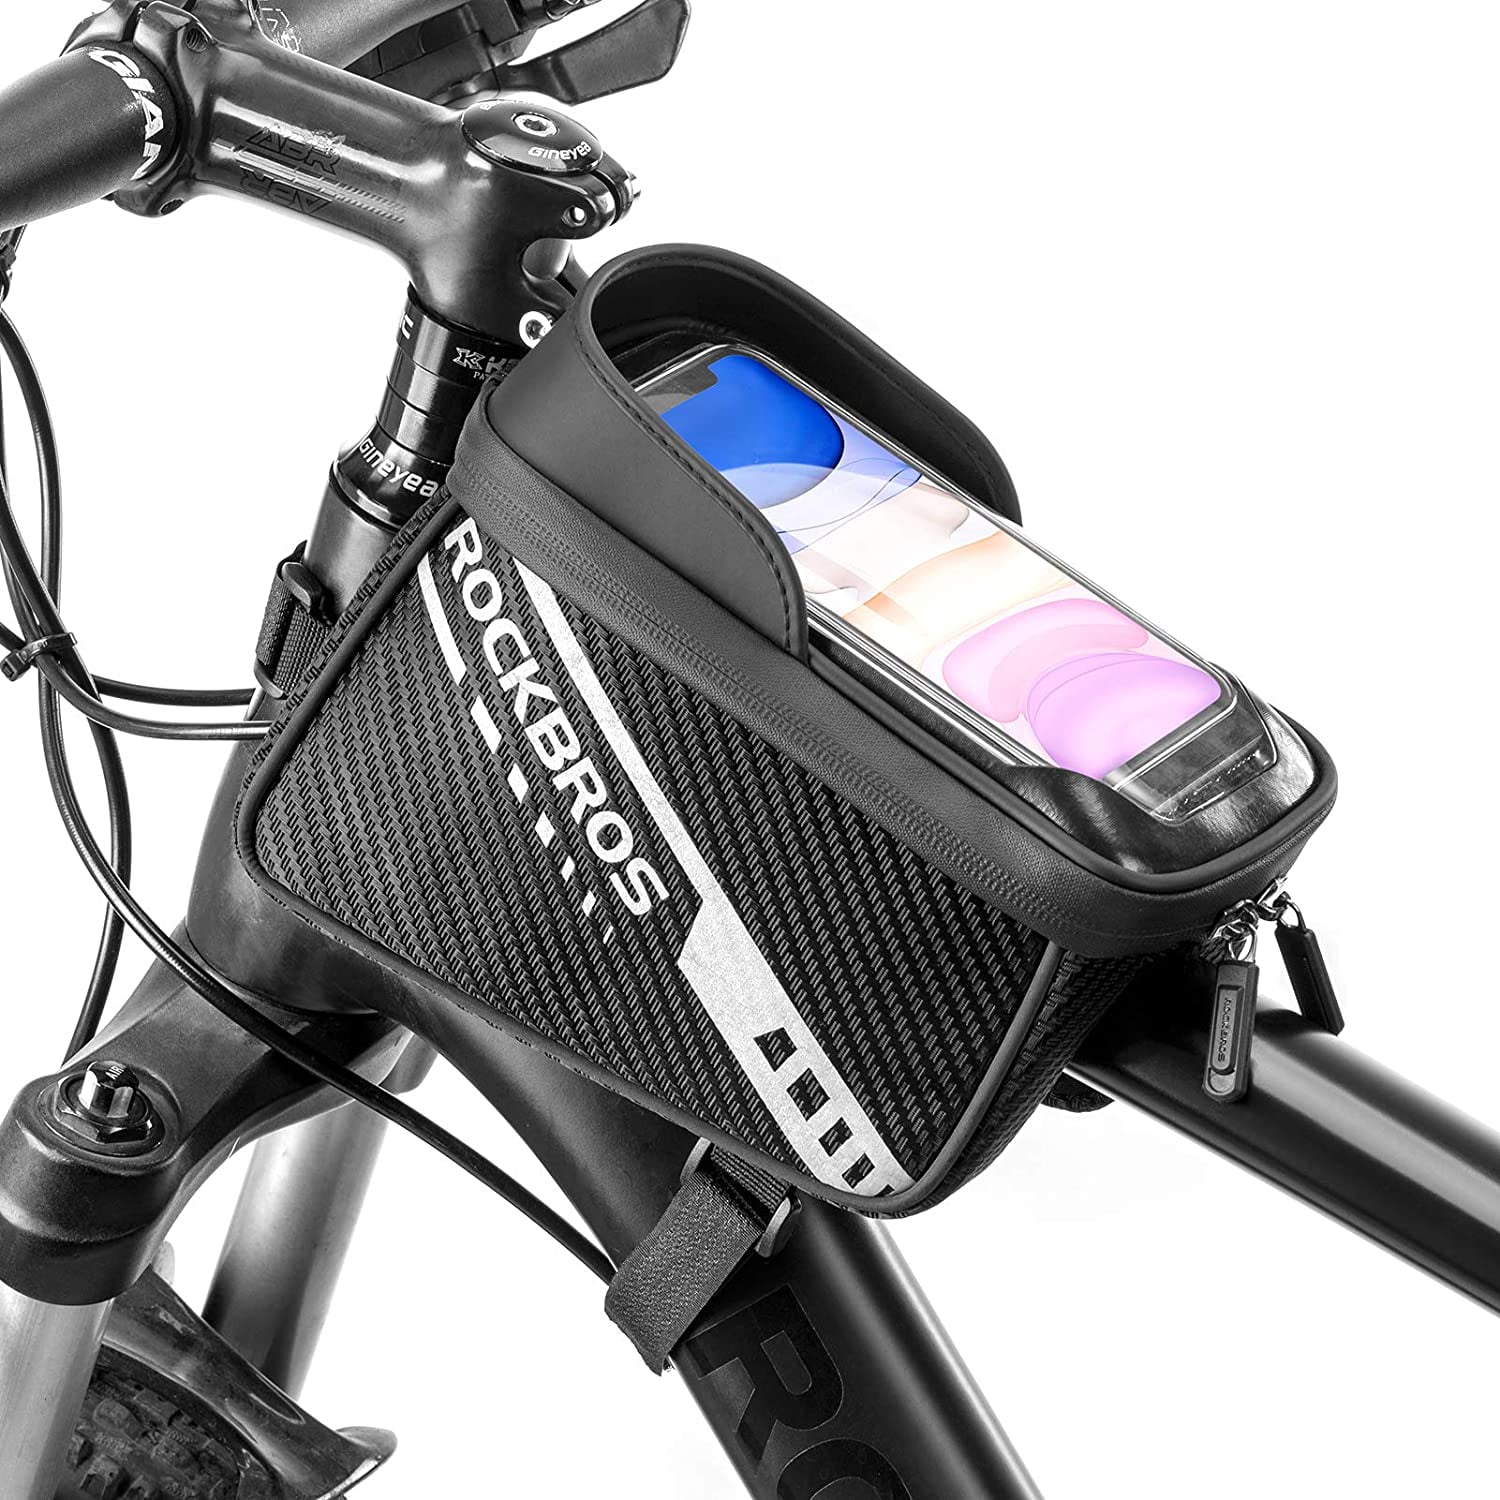 6 Cheeroyal Top Tube Bag Water Resistant Cycling Front Tube Frame Pannier Mountain MTB City Road Bicycle Crossbar Bag Pouch Holder for iPhone 7 8 7 Plus Bike Cellphone Frame Bag 6S Plus 5S SE Samsung Galaxy S8 S7 Edge S6 Edge Plus Google Nexus Huawei